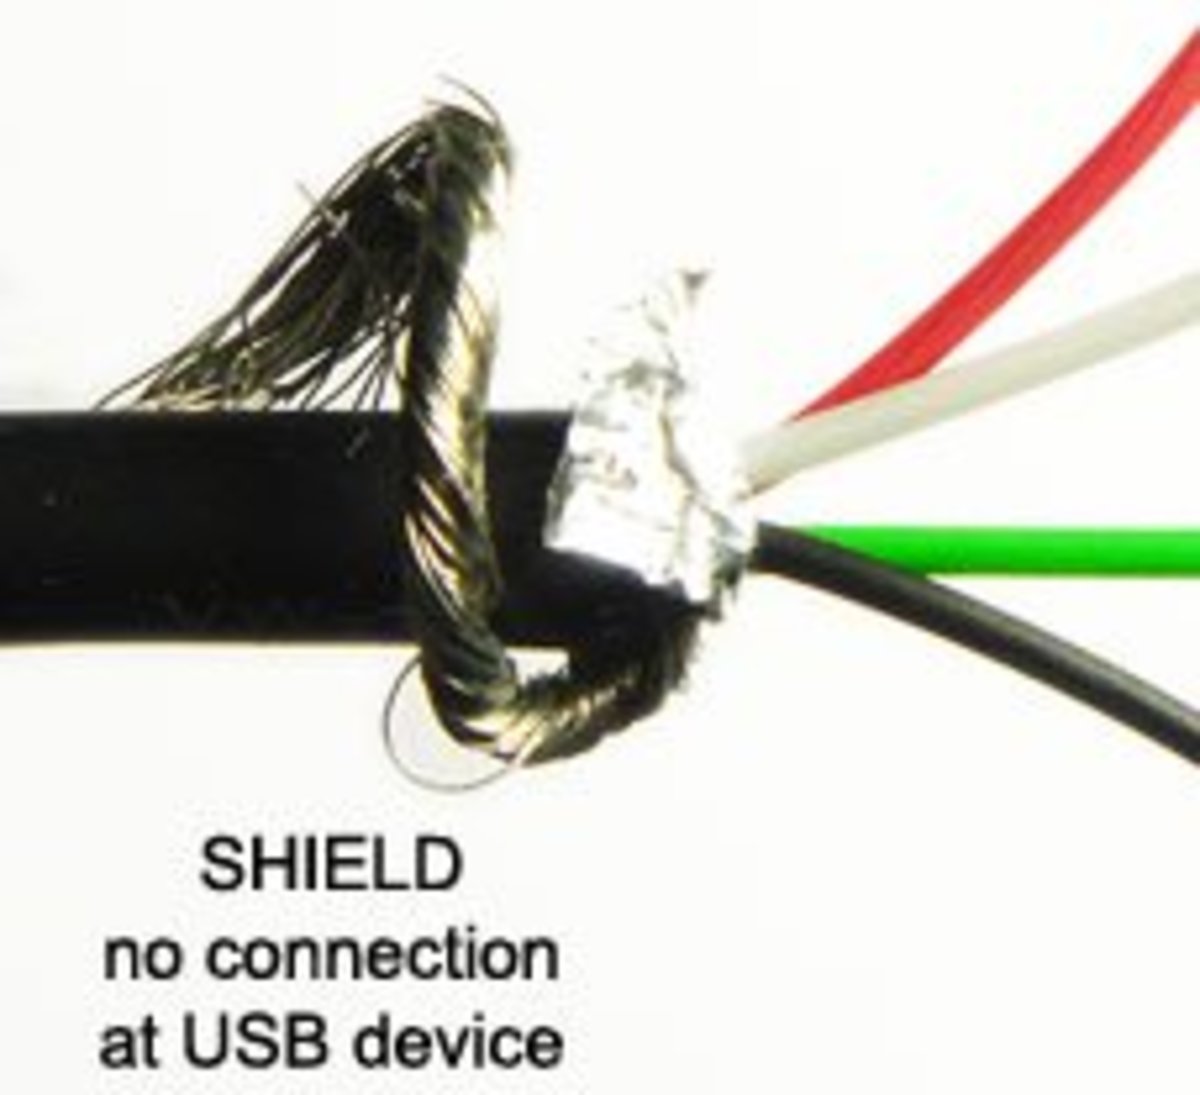 USB Pins has Wire Colors, the Red, Black, Green and White